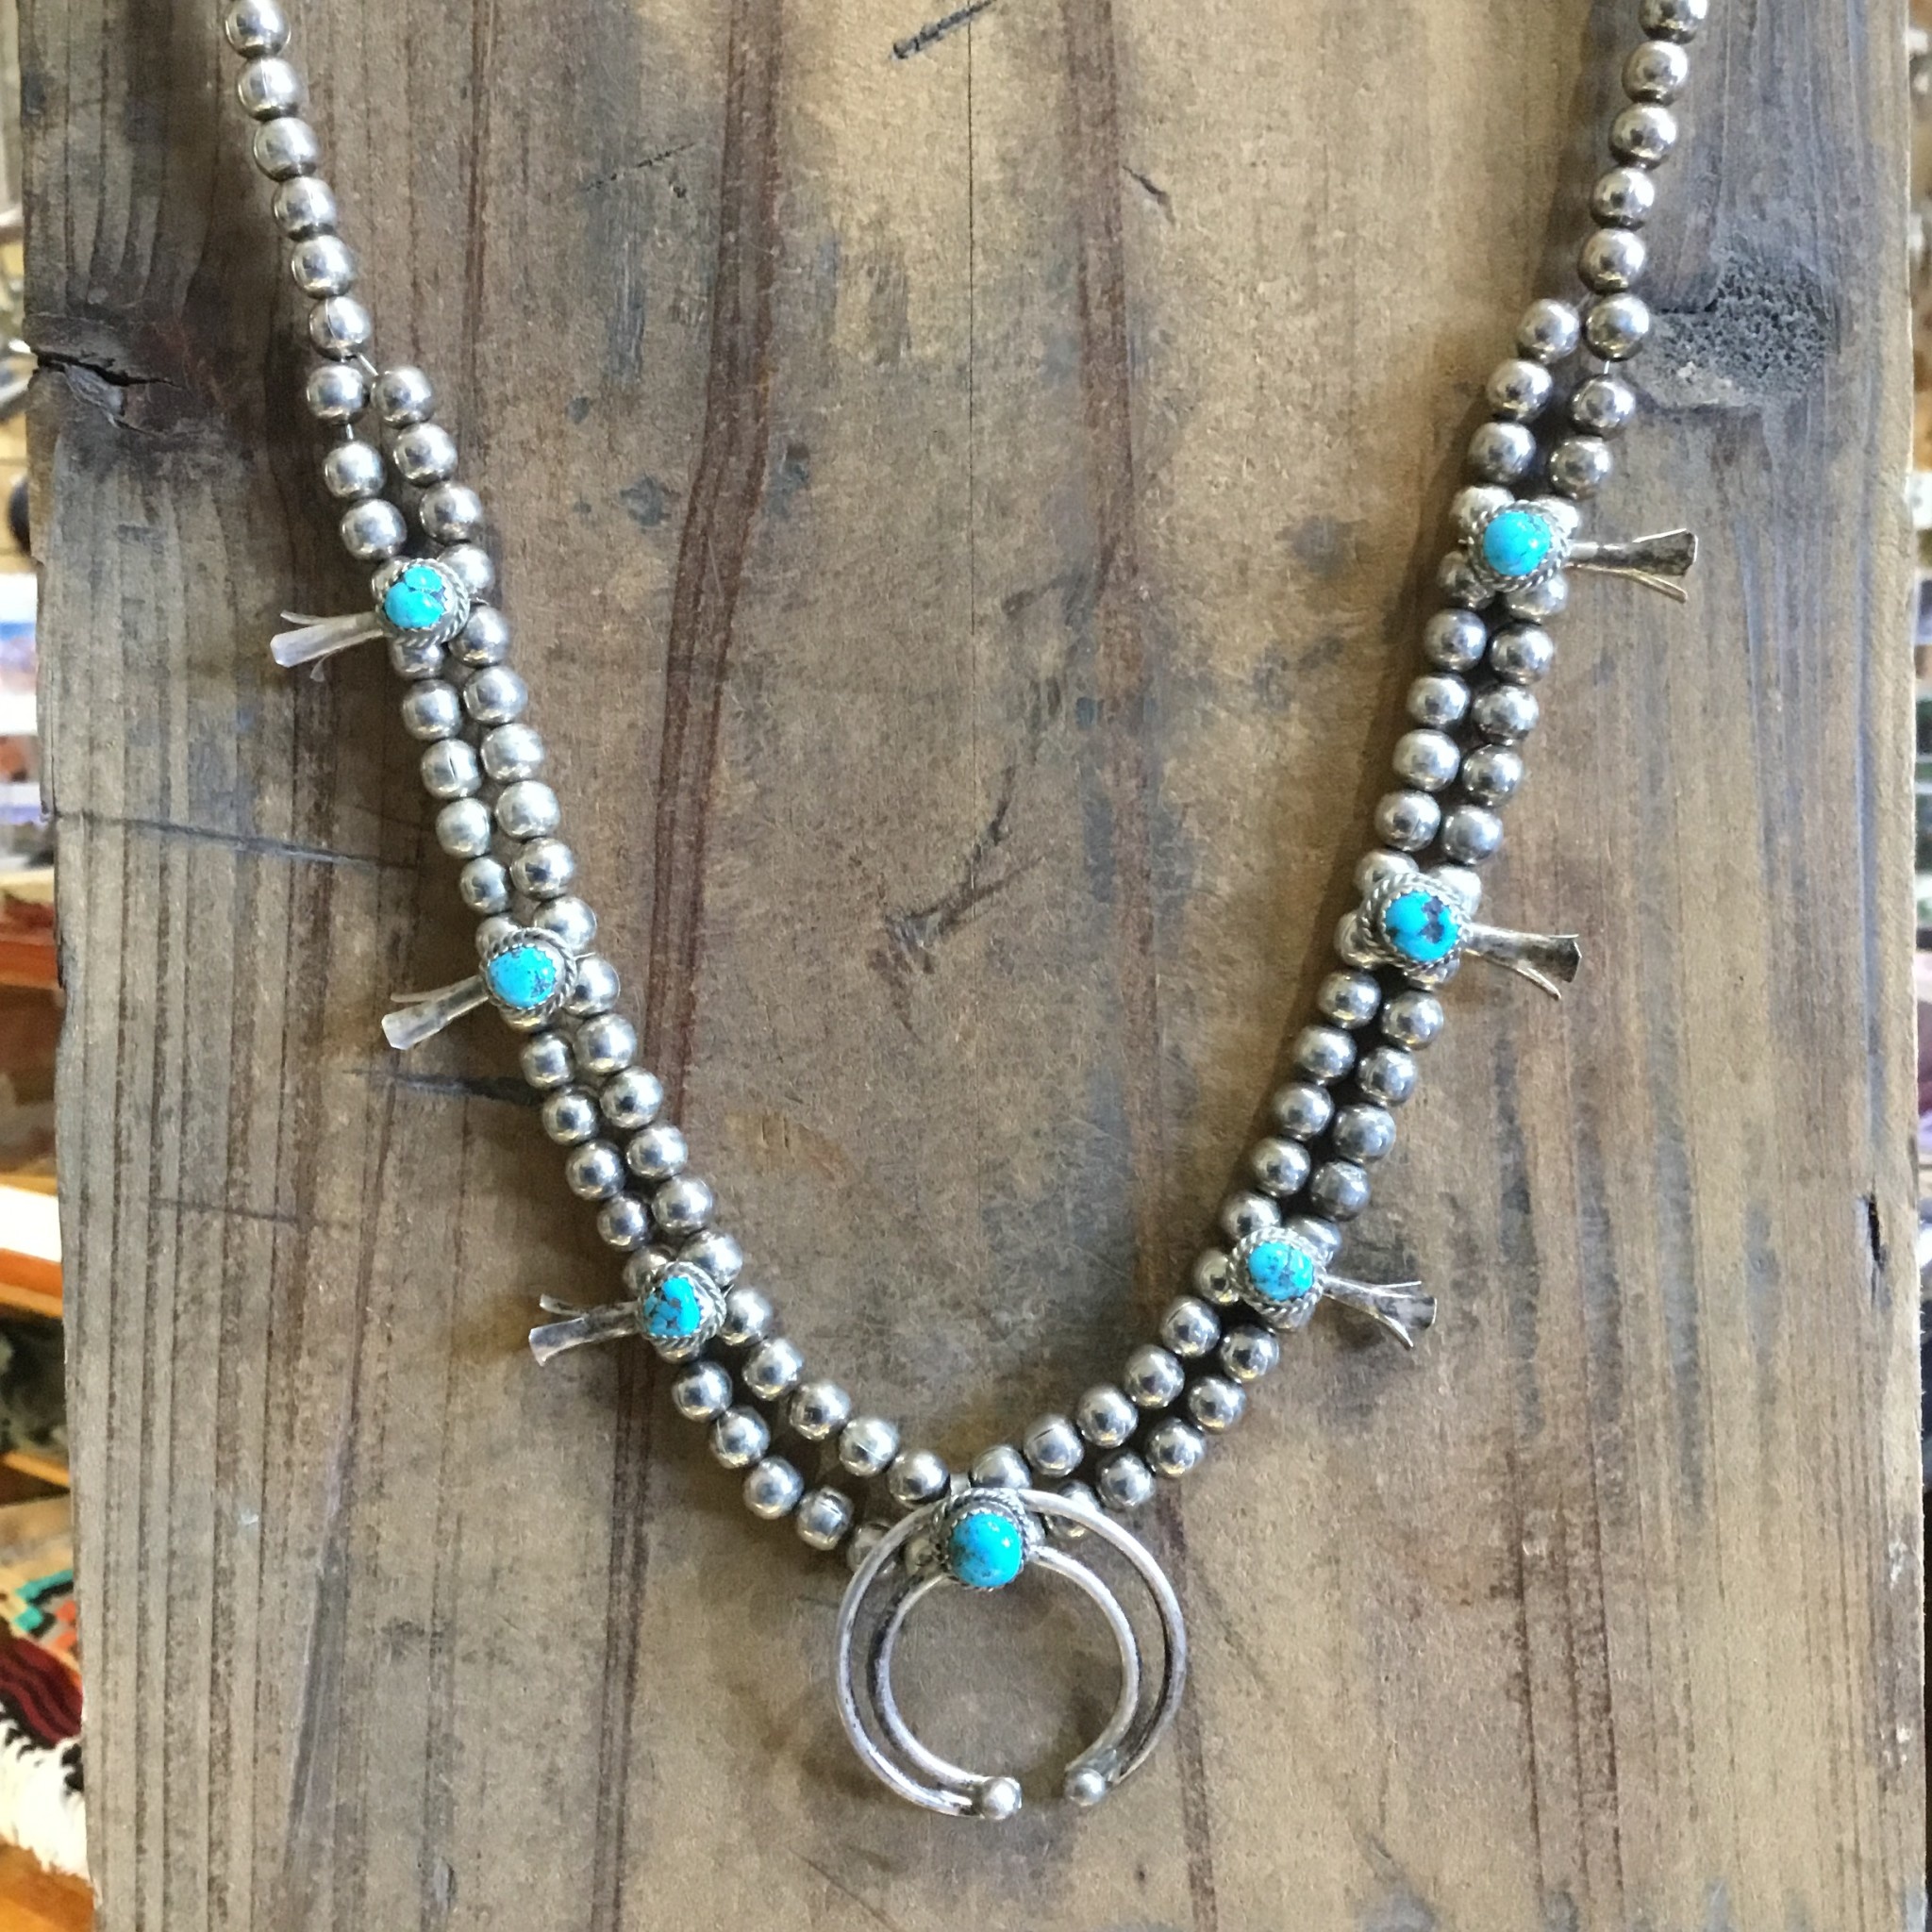 Shop Squash Blossom Necklaces | Authentic Native American Jewelry